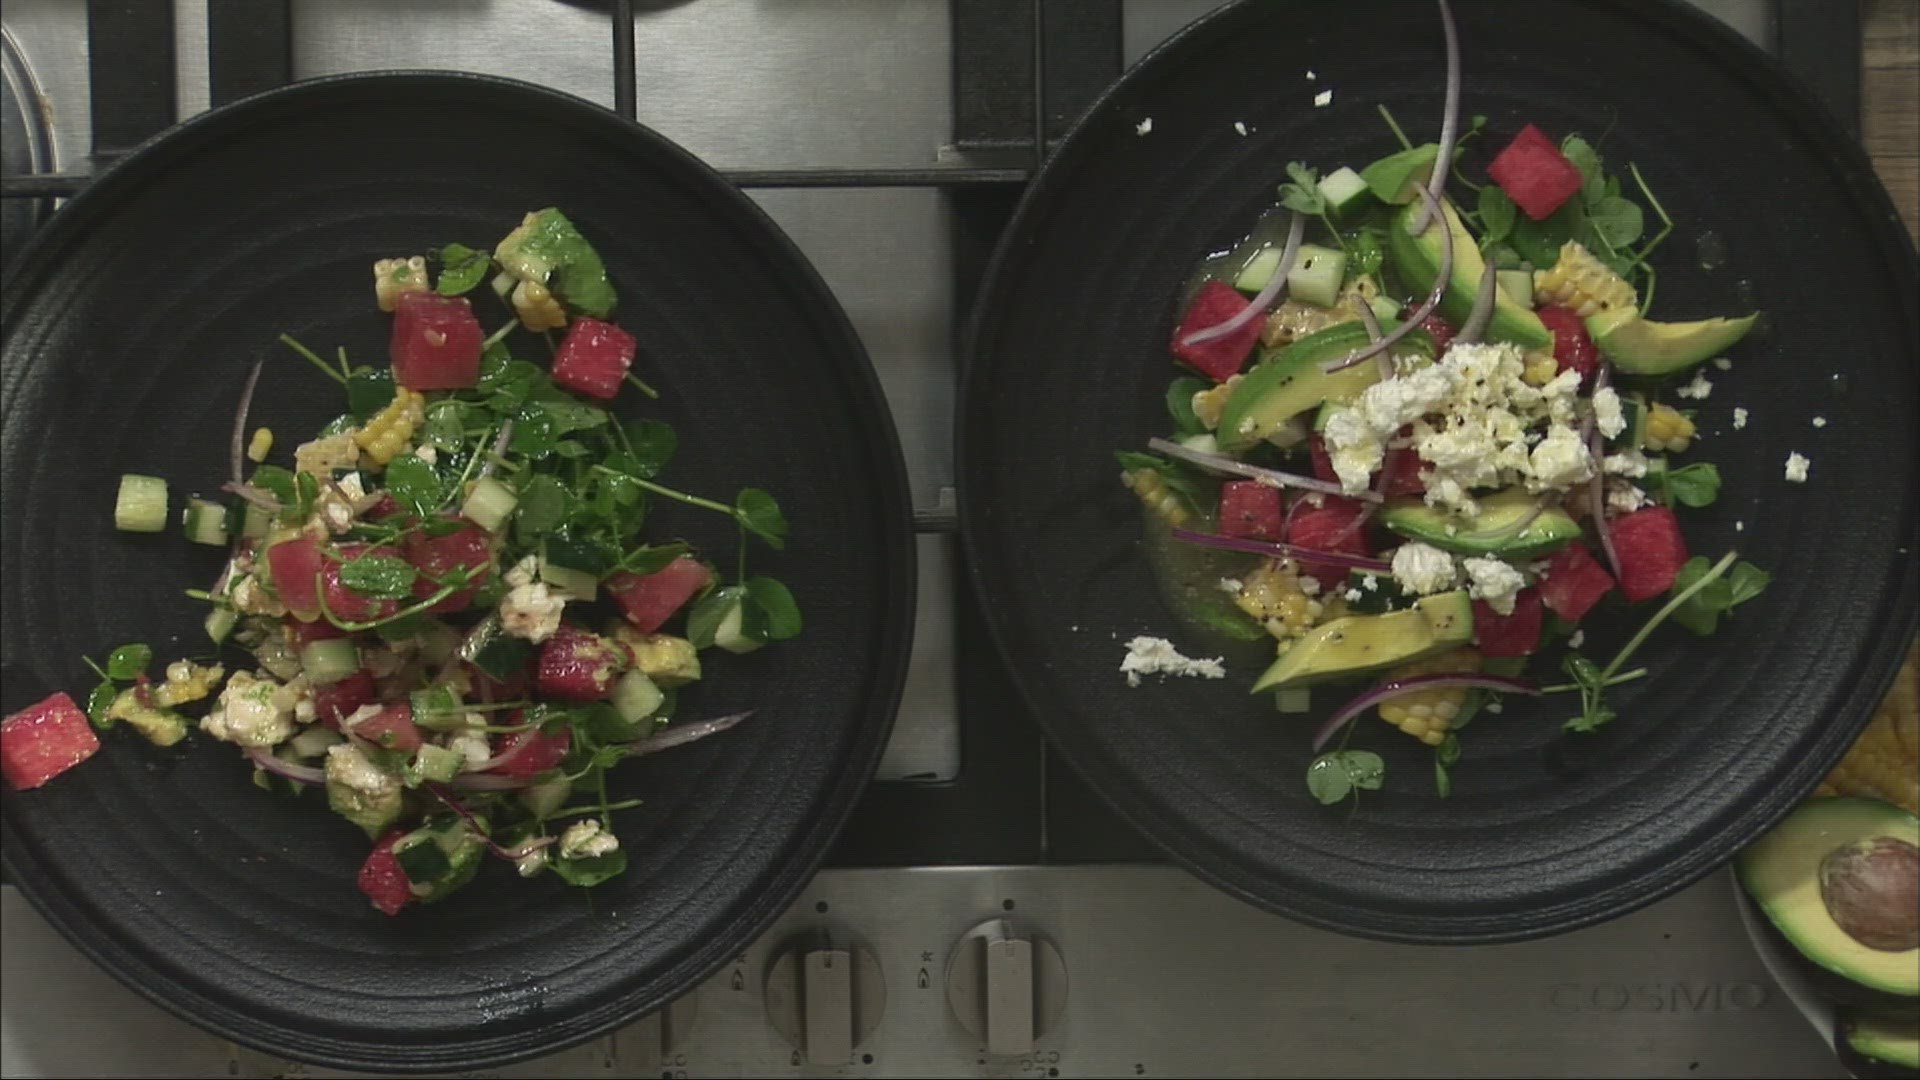 Chef David Turin shares his recipe for watermelon salad in the 207 kitchen.